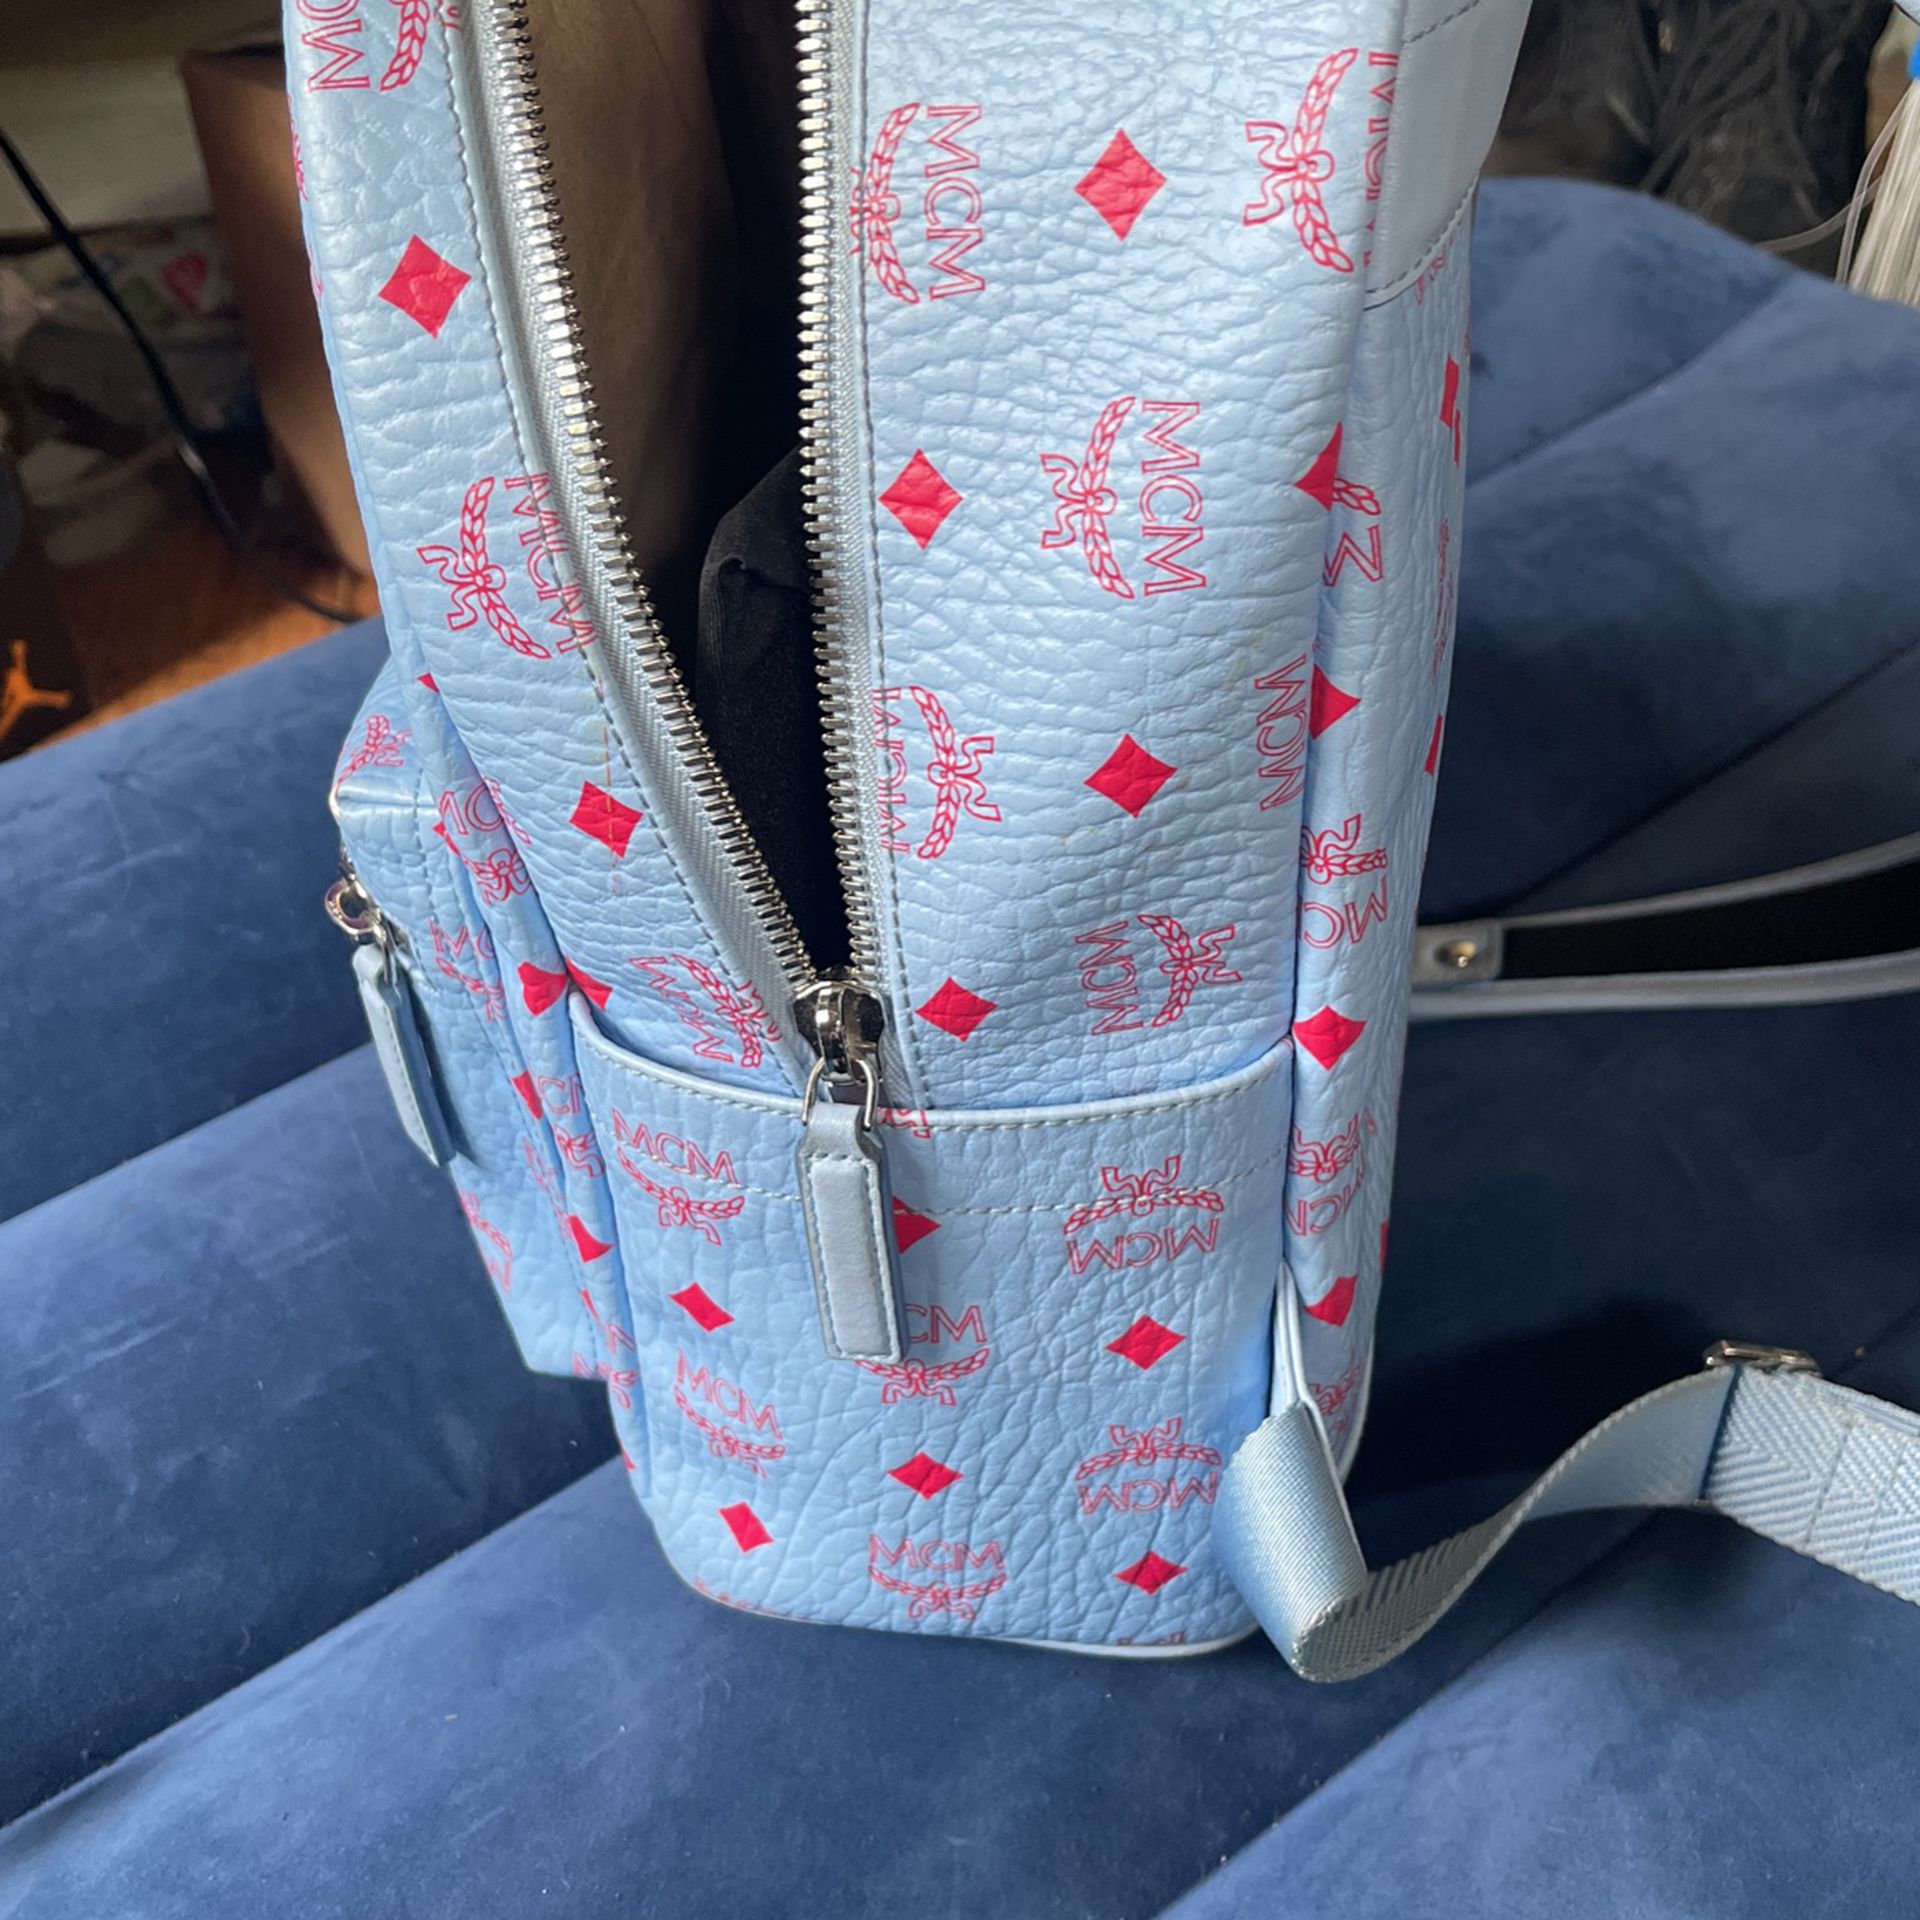 New MCM Mini Backpack for Sale in Sacramento, CA - OfferUp